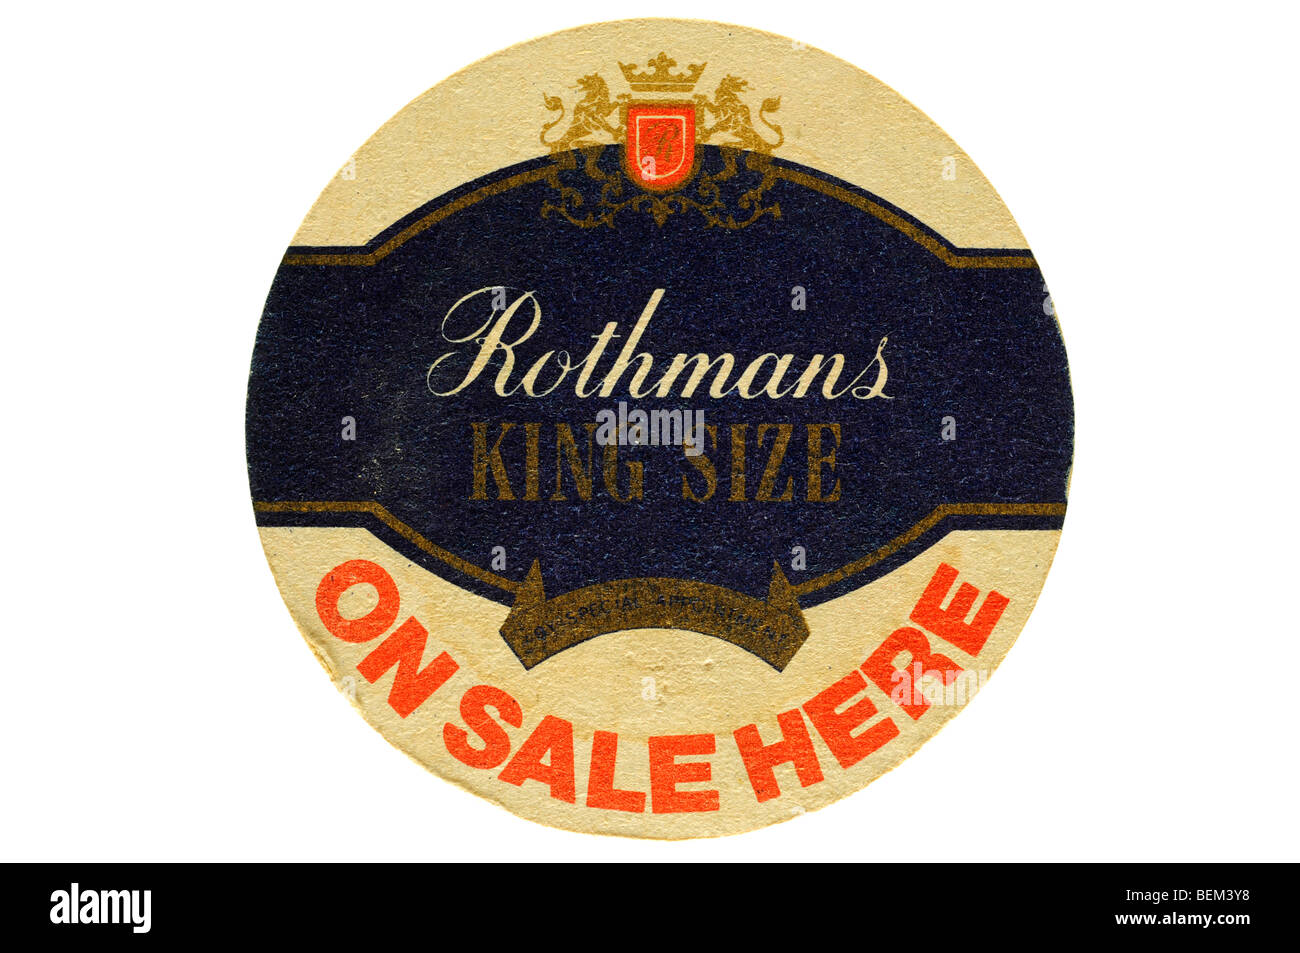 rothmans king size on sale here Stock Photo